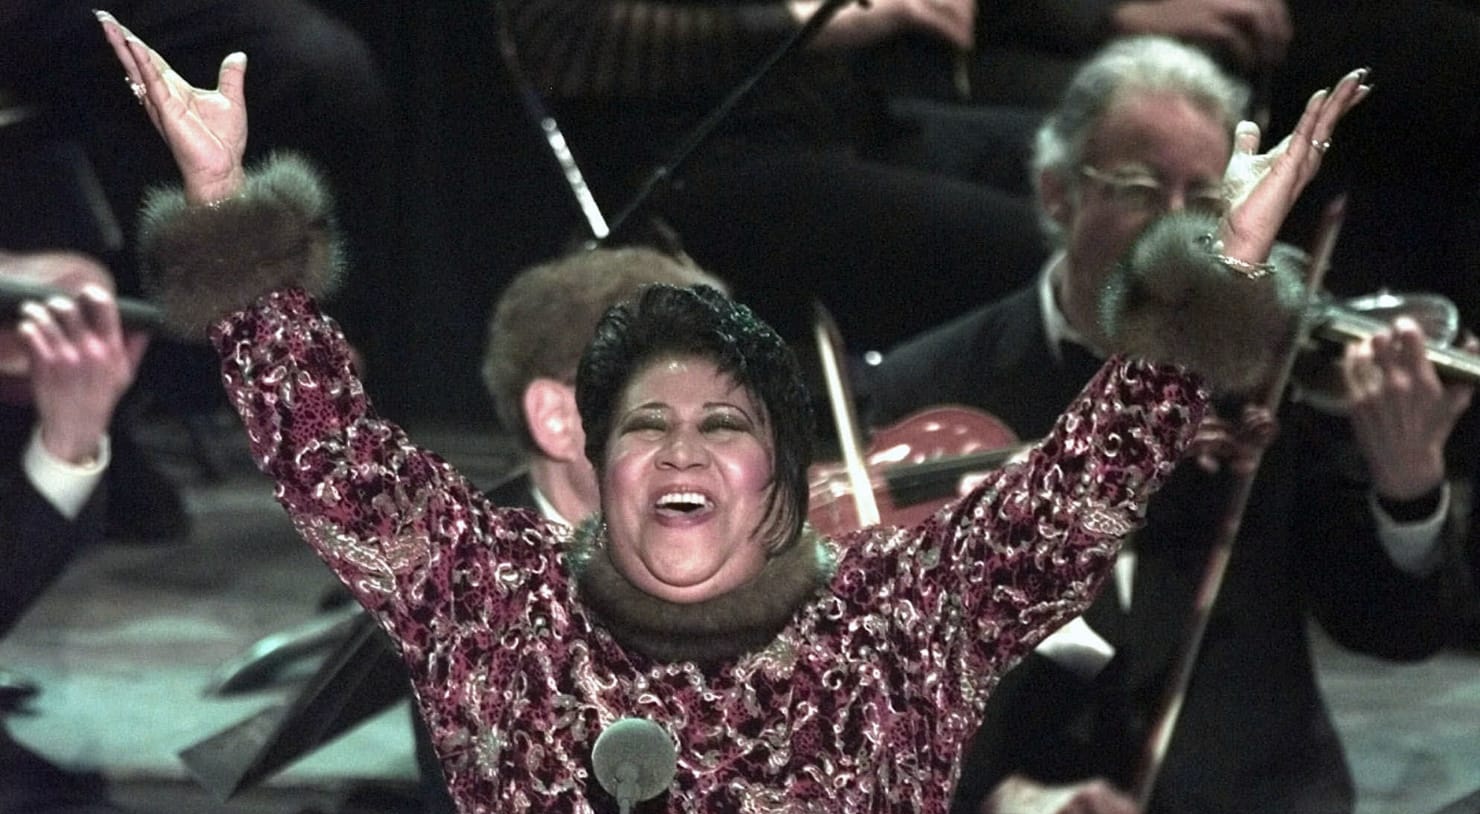 Throwback to when Aretha Franklin filled-in for an ailing Pavarotti and stunned everyone